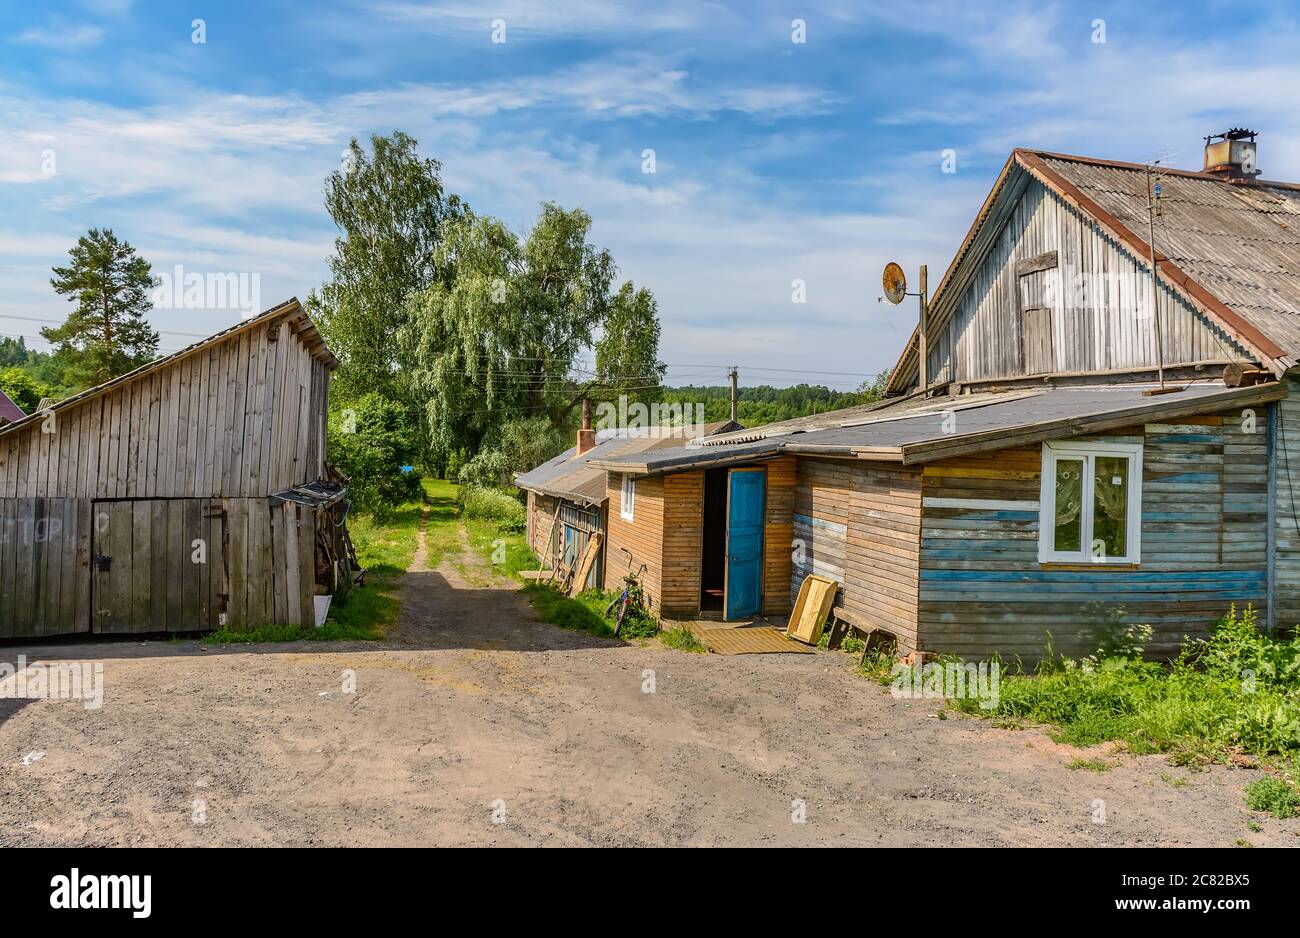 The village of Zaitsevo on the road from St. Petersburg to Moscow in the Novgorod region. Stock Photo